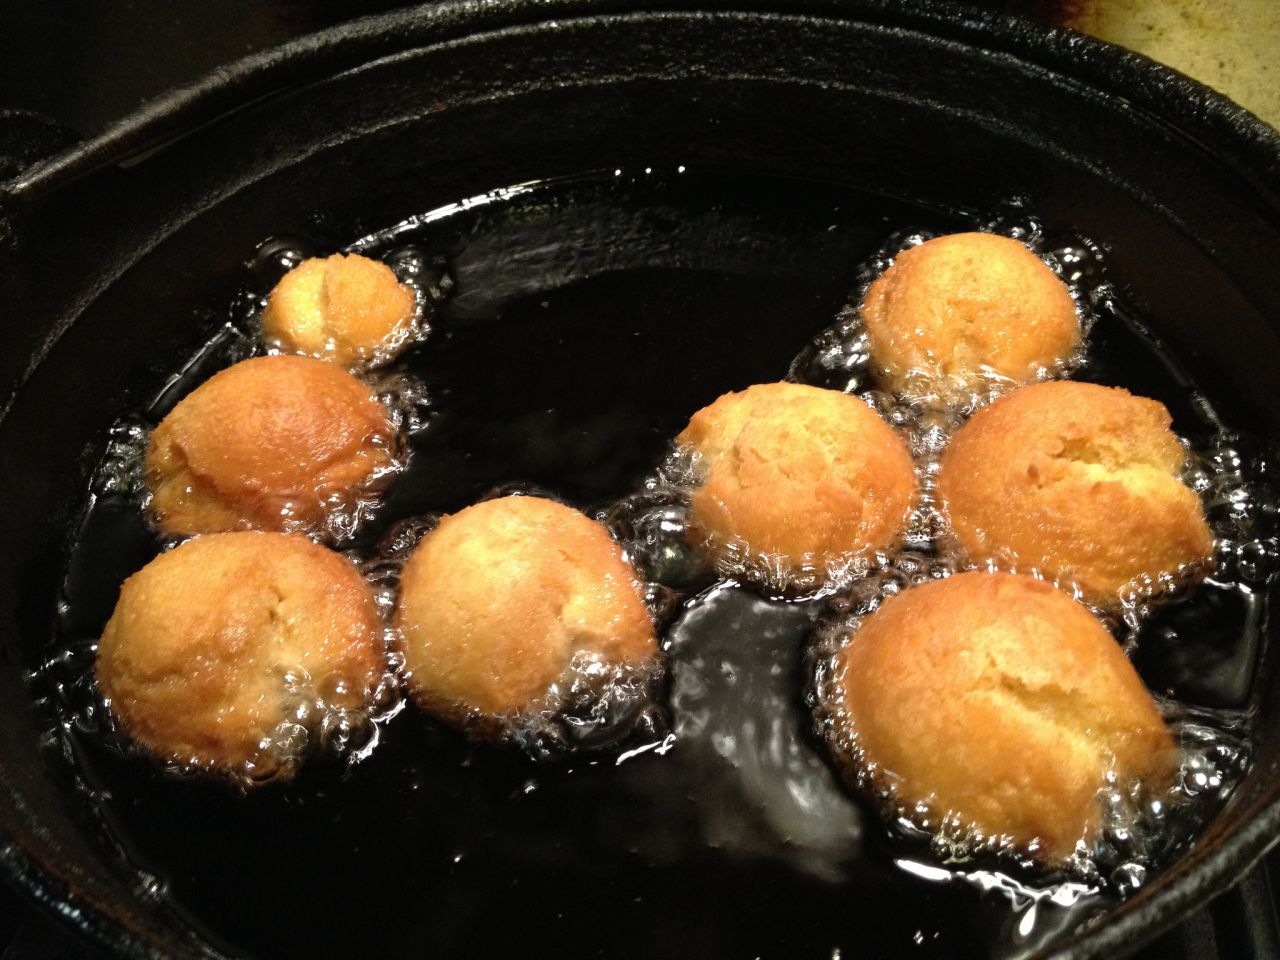 <strong>Sweet buns: </strong>Sata andagi (the name means literally "deep-fried sugar") are Okinawan donuts, a heavyweight confection with a crisp, deep brown crust encasing a dense, cakey center.